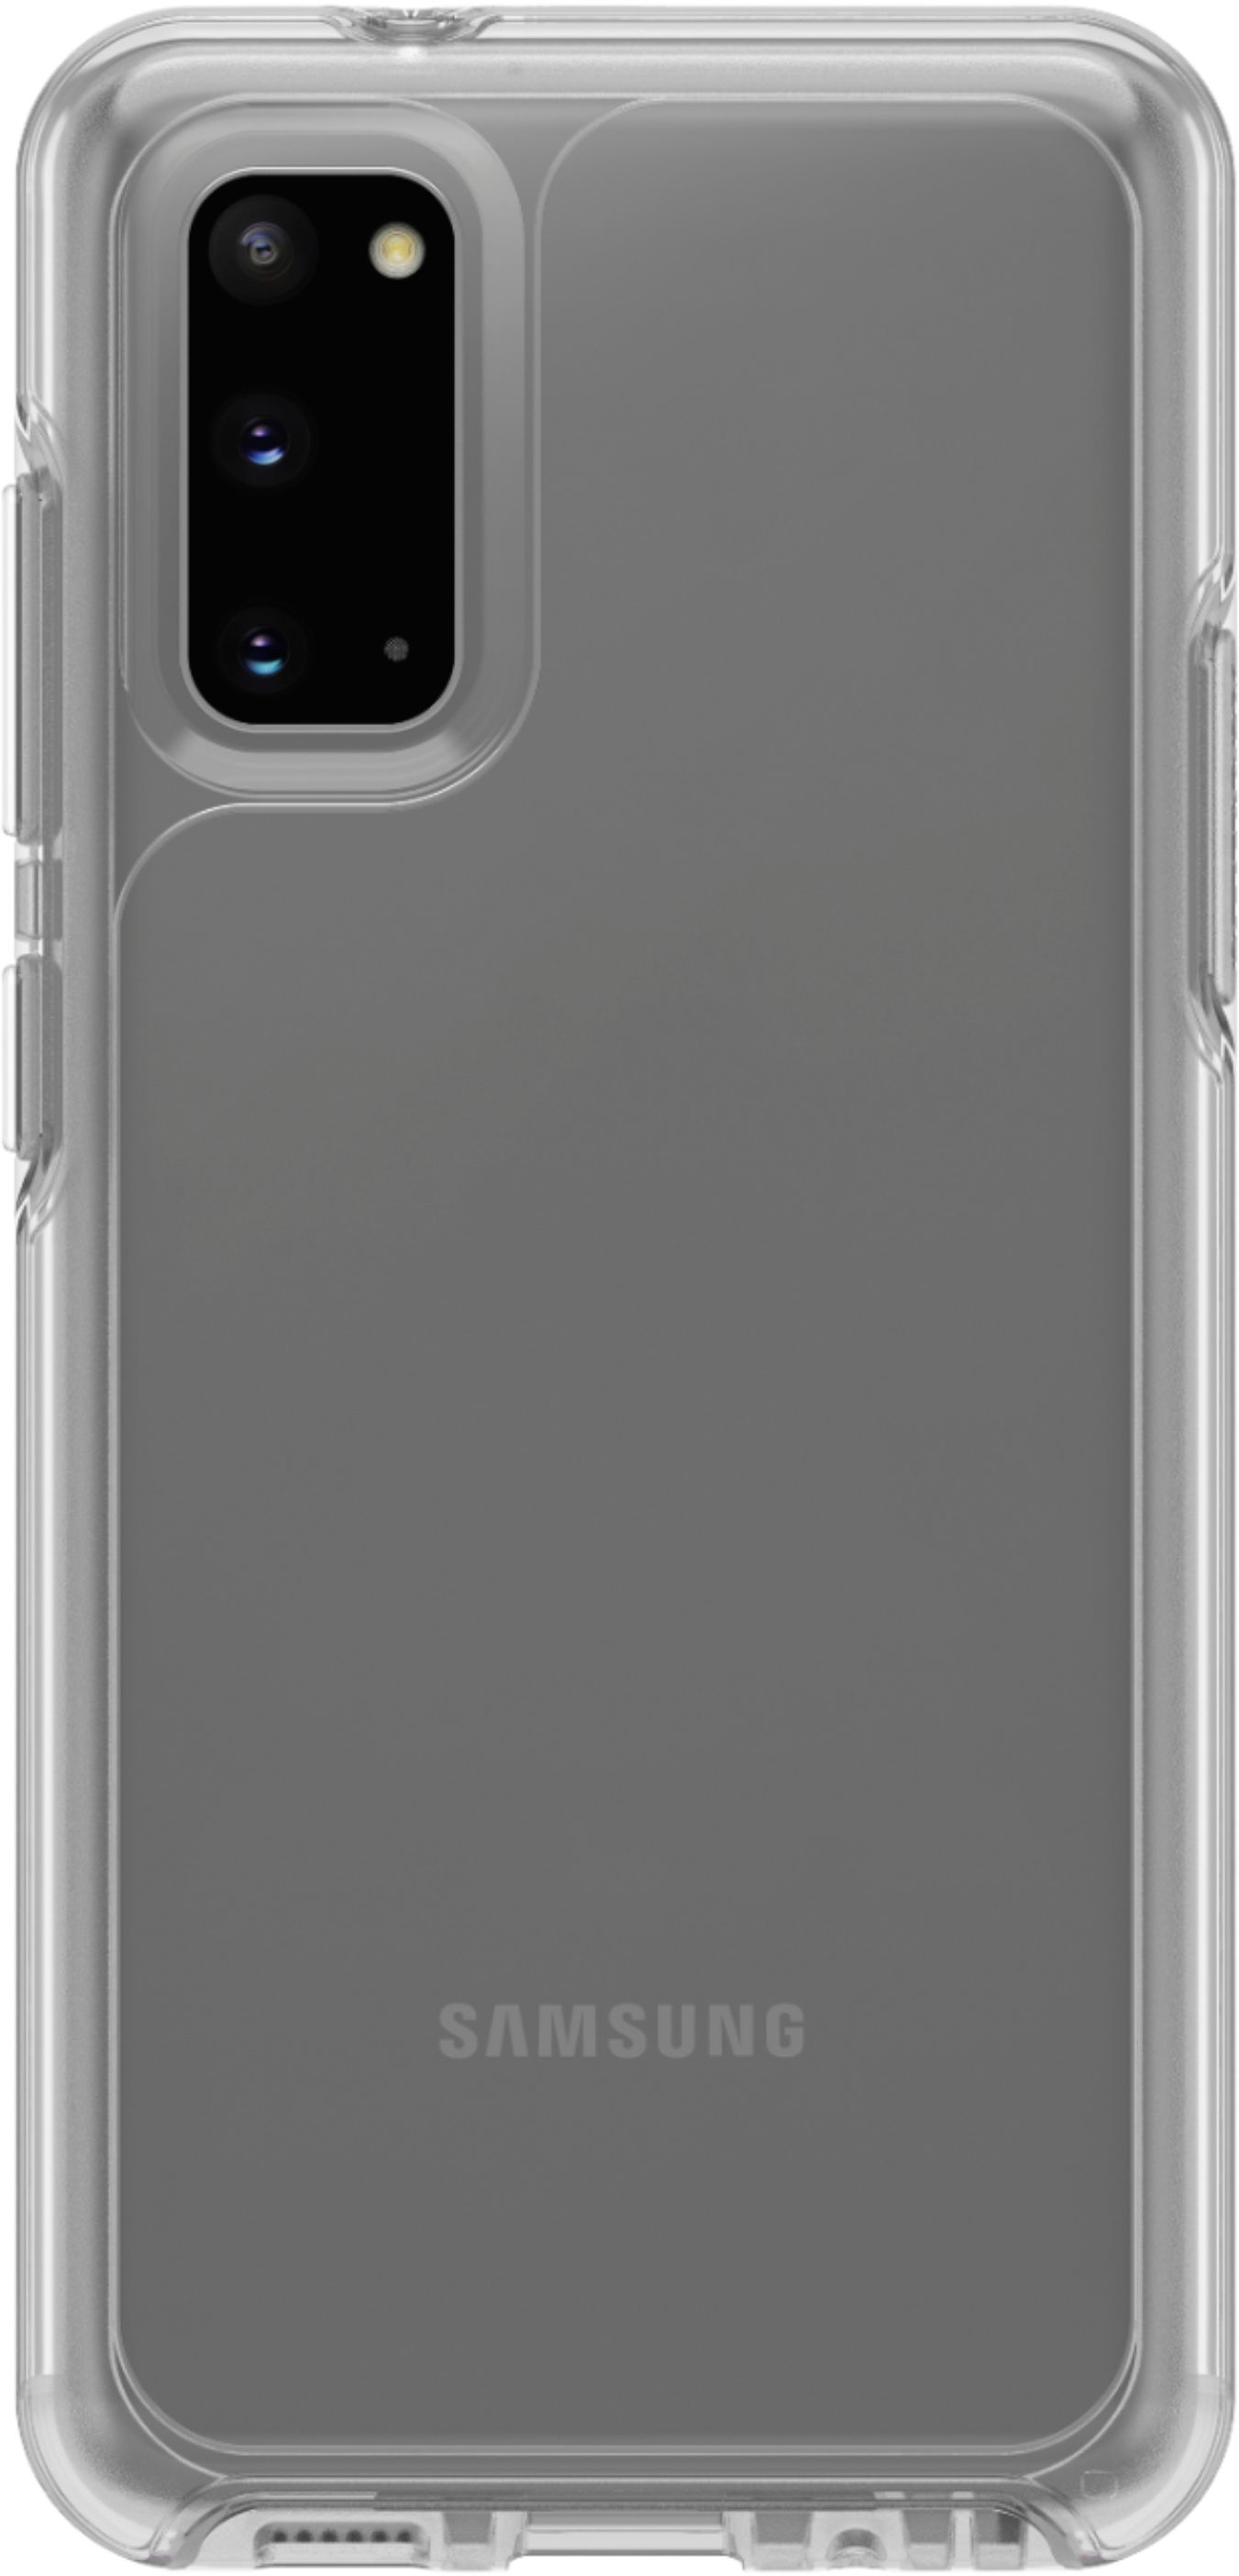 OtterBox - Symmetry Series Case for Samsung Galaxy S20 5G - Clear